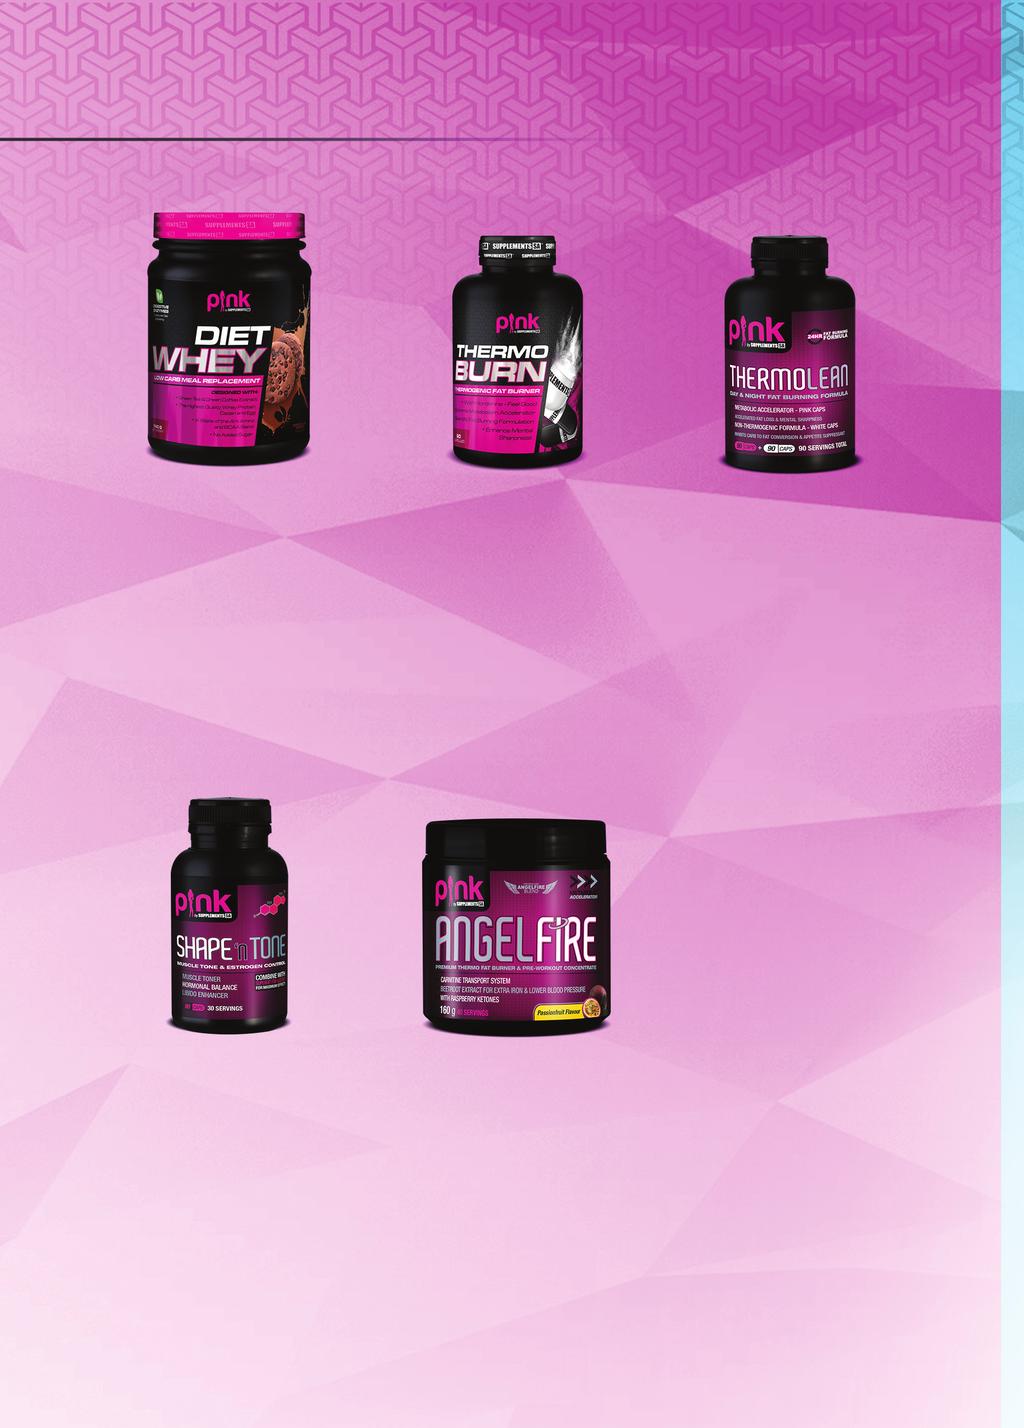 PINK RANGE Diet Whey Low Carb Meal Replacement Thermo Burn Thermogenic Fat Burner Thermo Lean Day & Night Fat Burning Formula Green Tea & Green Coffee Extract With Hordenine - Feel Good The Highest